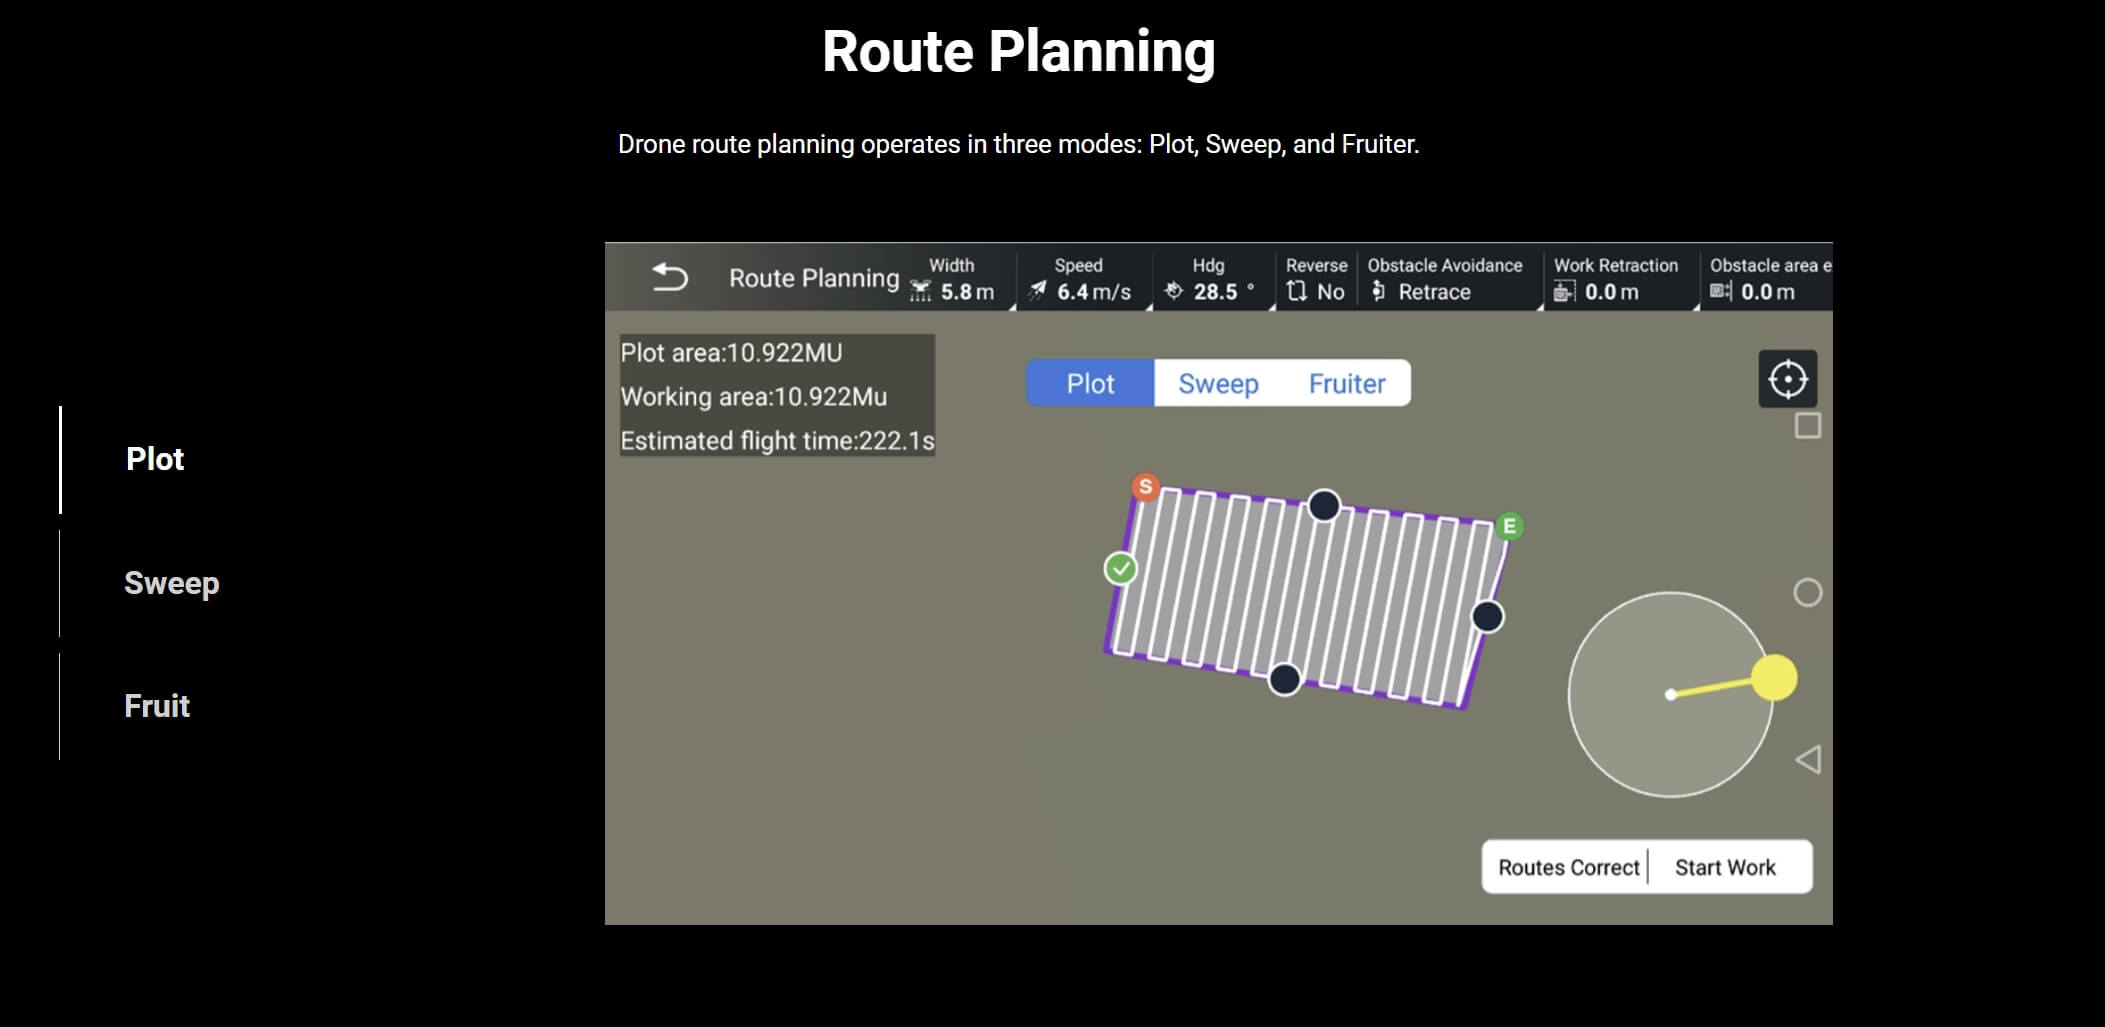 H32X Agriculture Drone, Drone route planning operates in three modes: Plot; Sweep, and Fruit